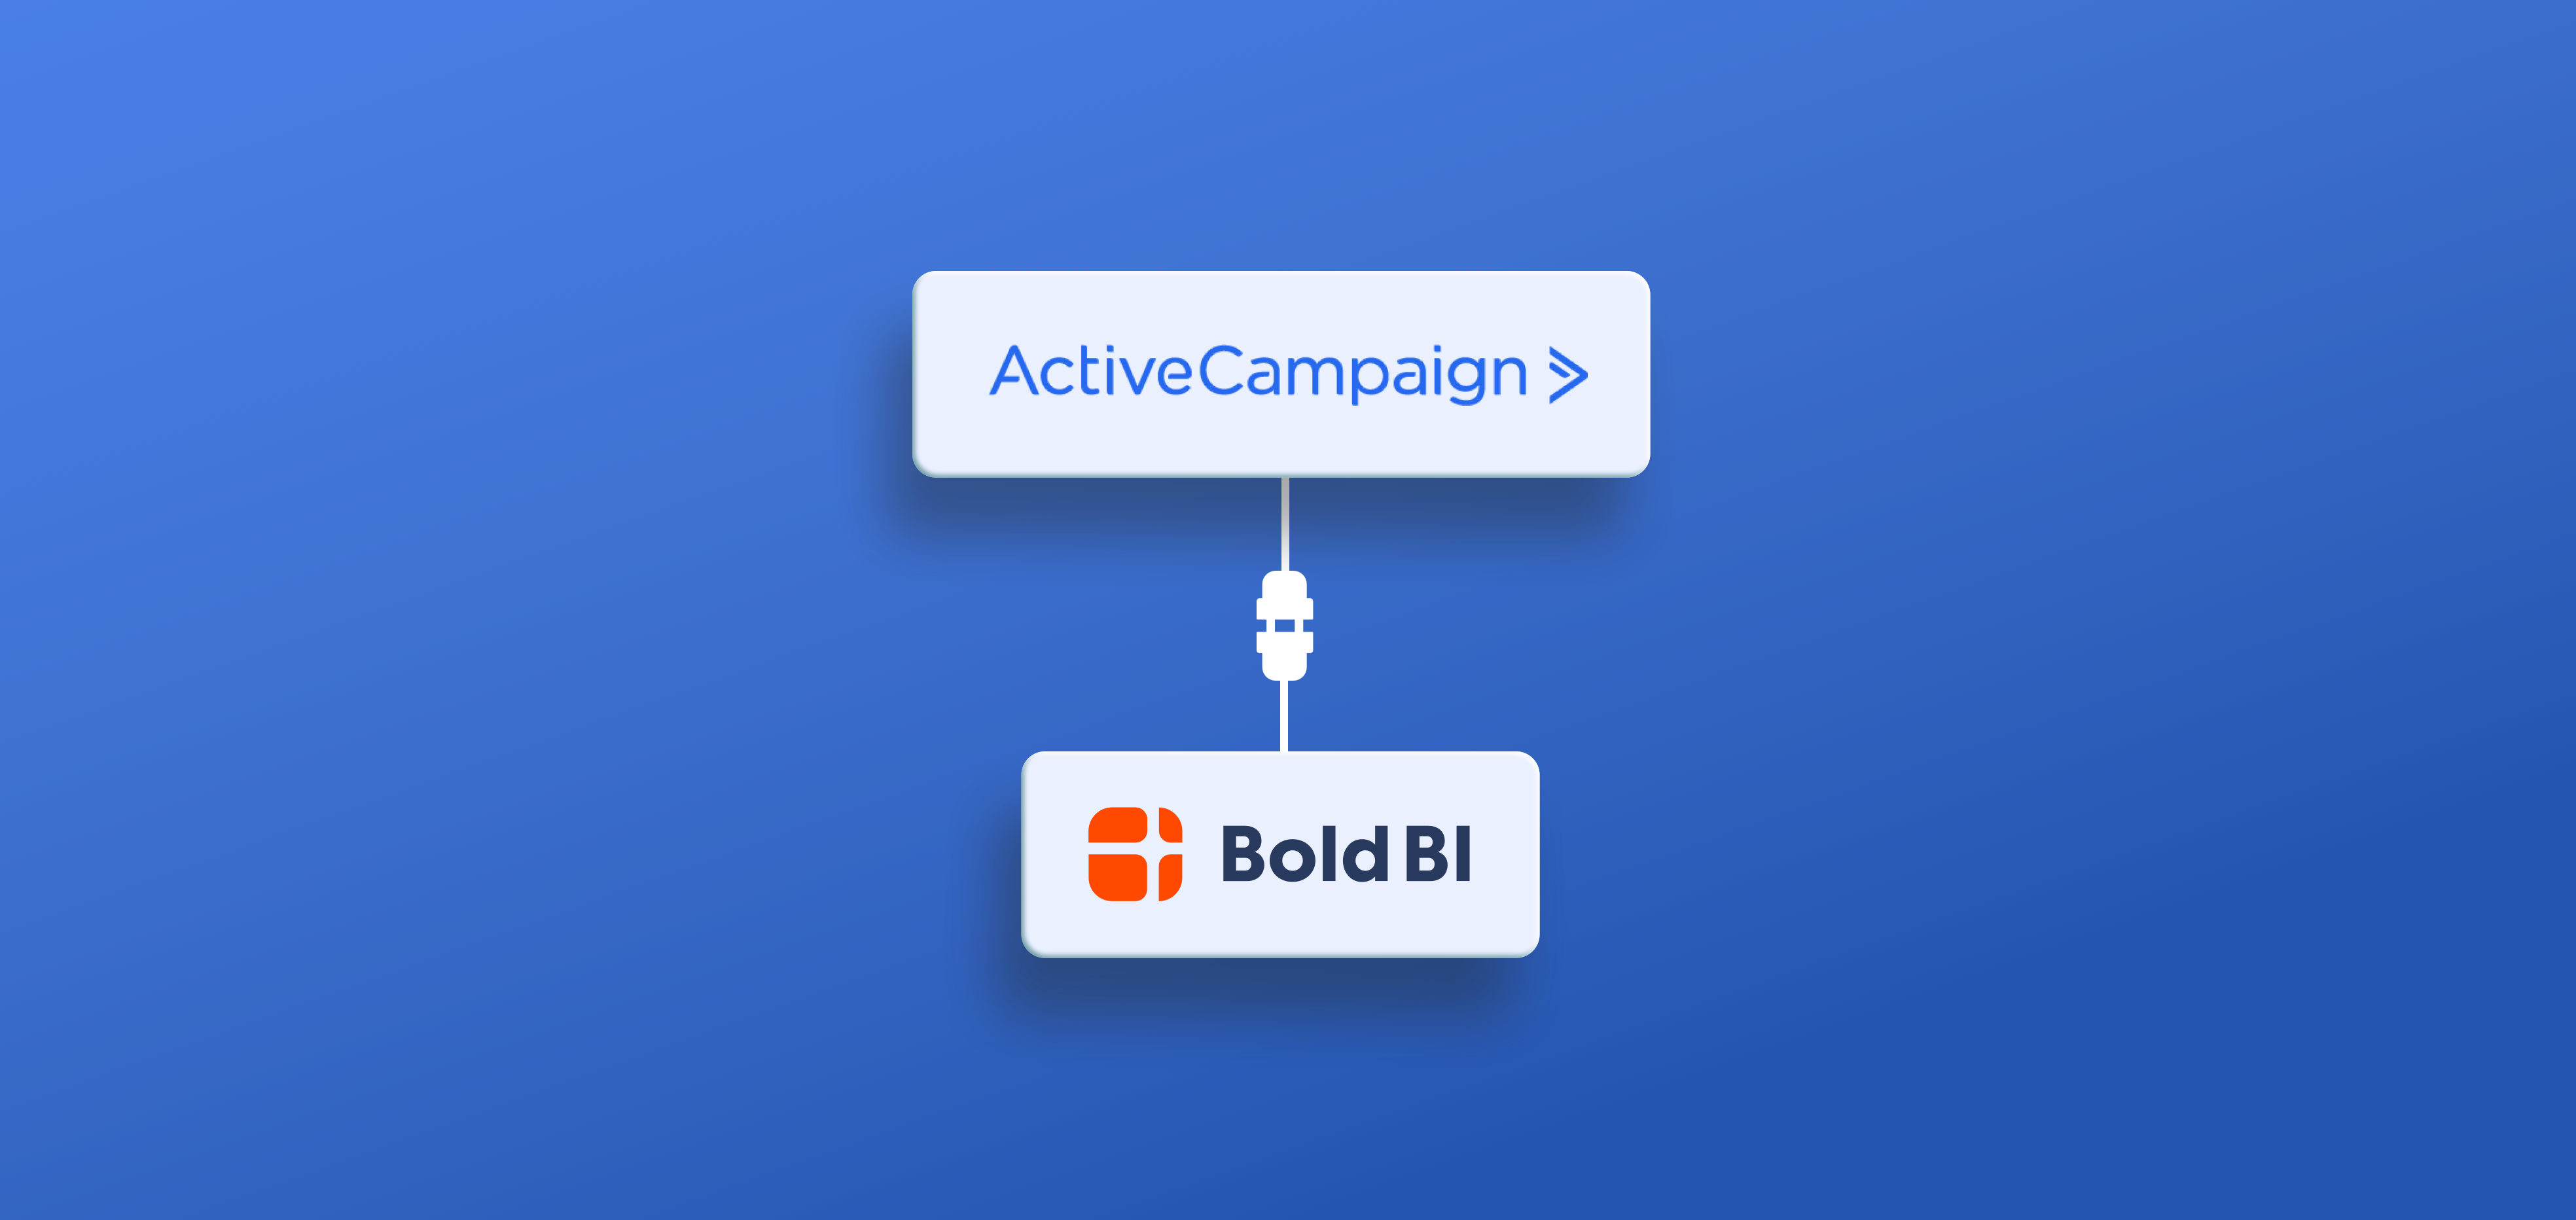 Connecting Bold BI to ActiveCampaign data source